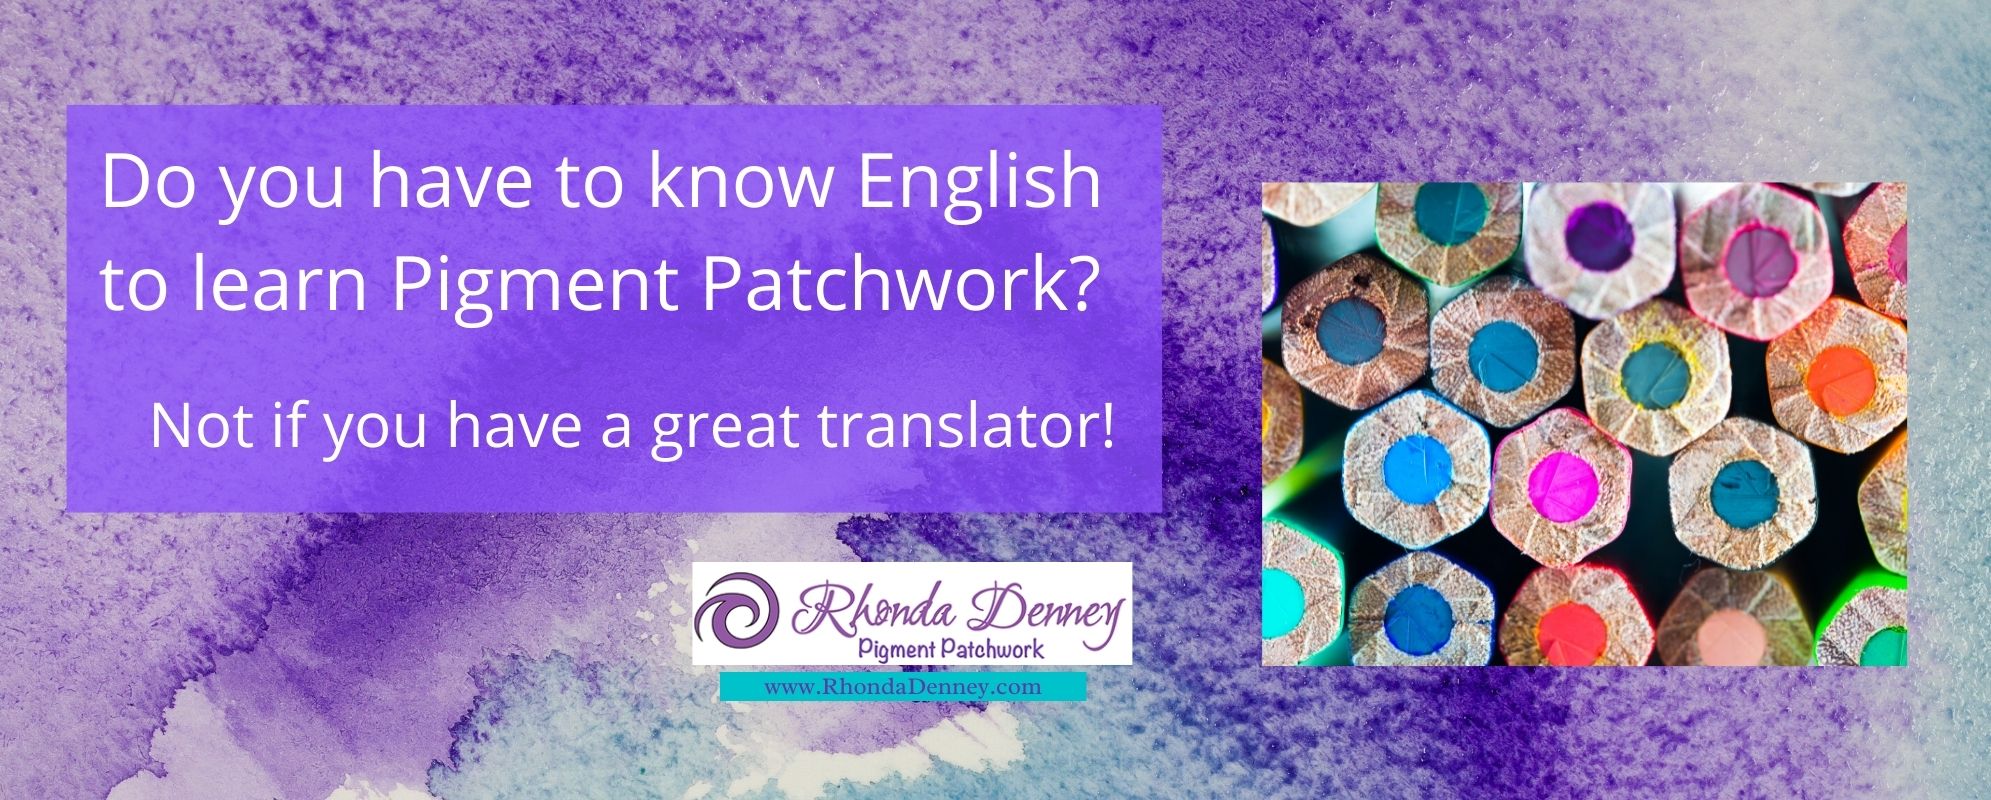 Rhonda Denney - Do you have to know English to learn Pigment Patchwork? Not if you have a great translator!